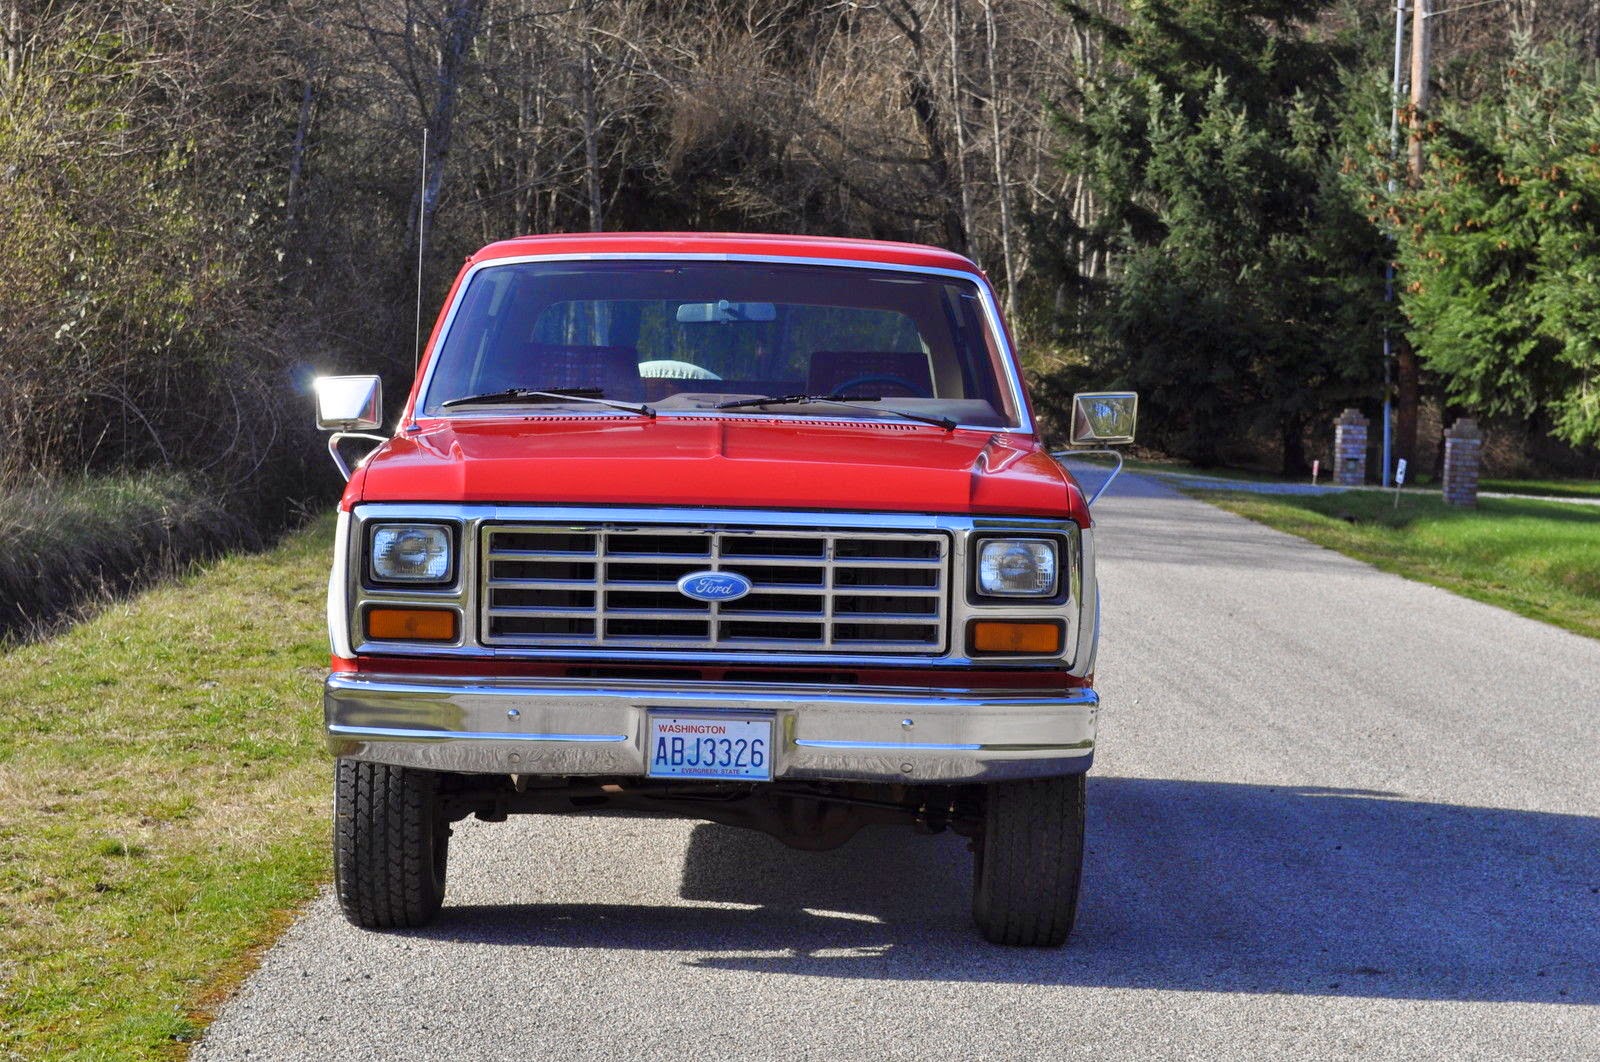 All American Classic Cars: 1982 Ford Bronco XLT Lariat 4x4 2-Door SUV